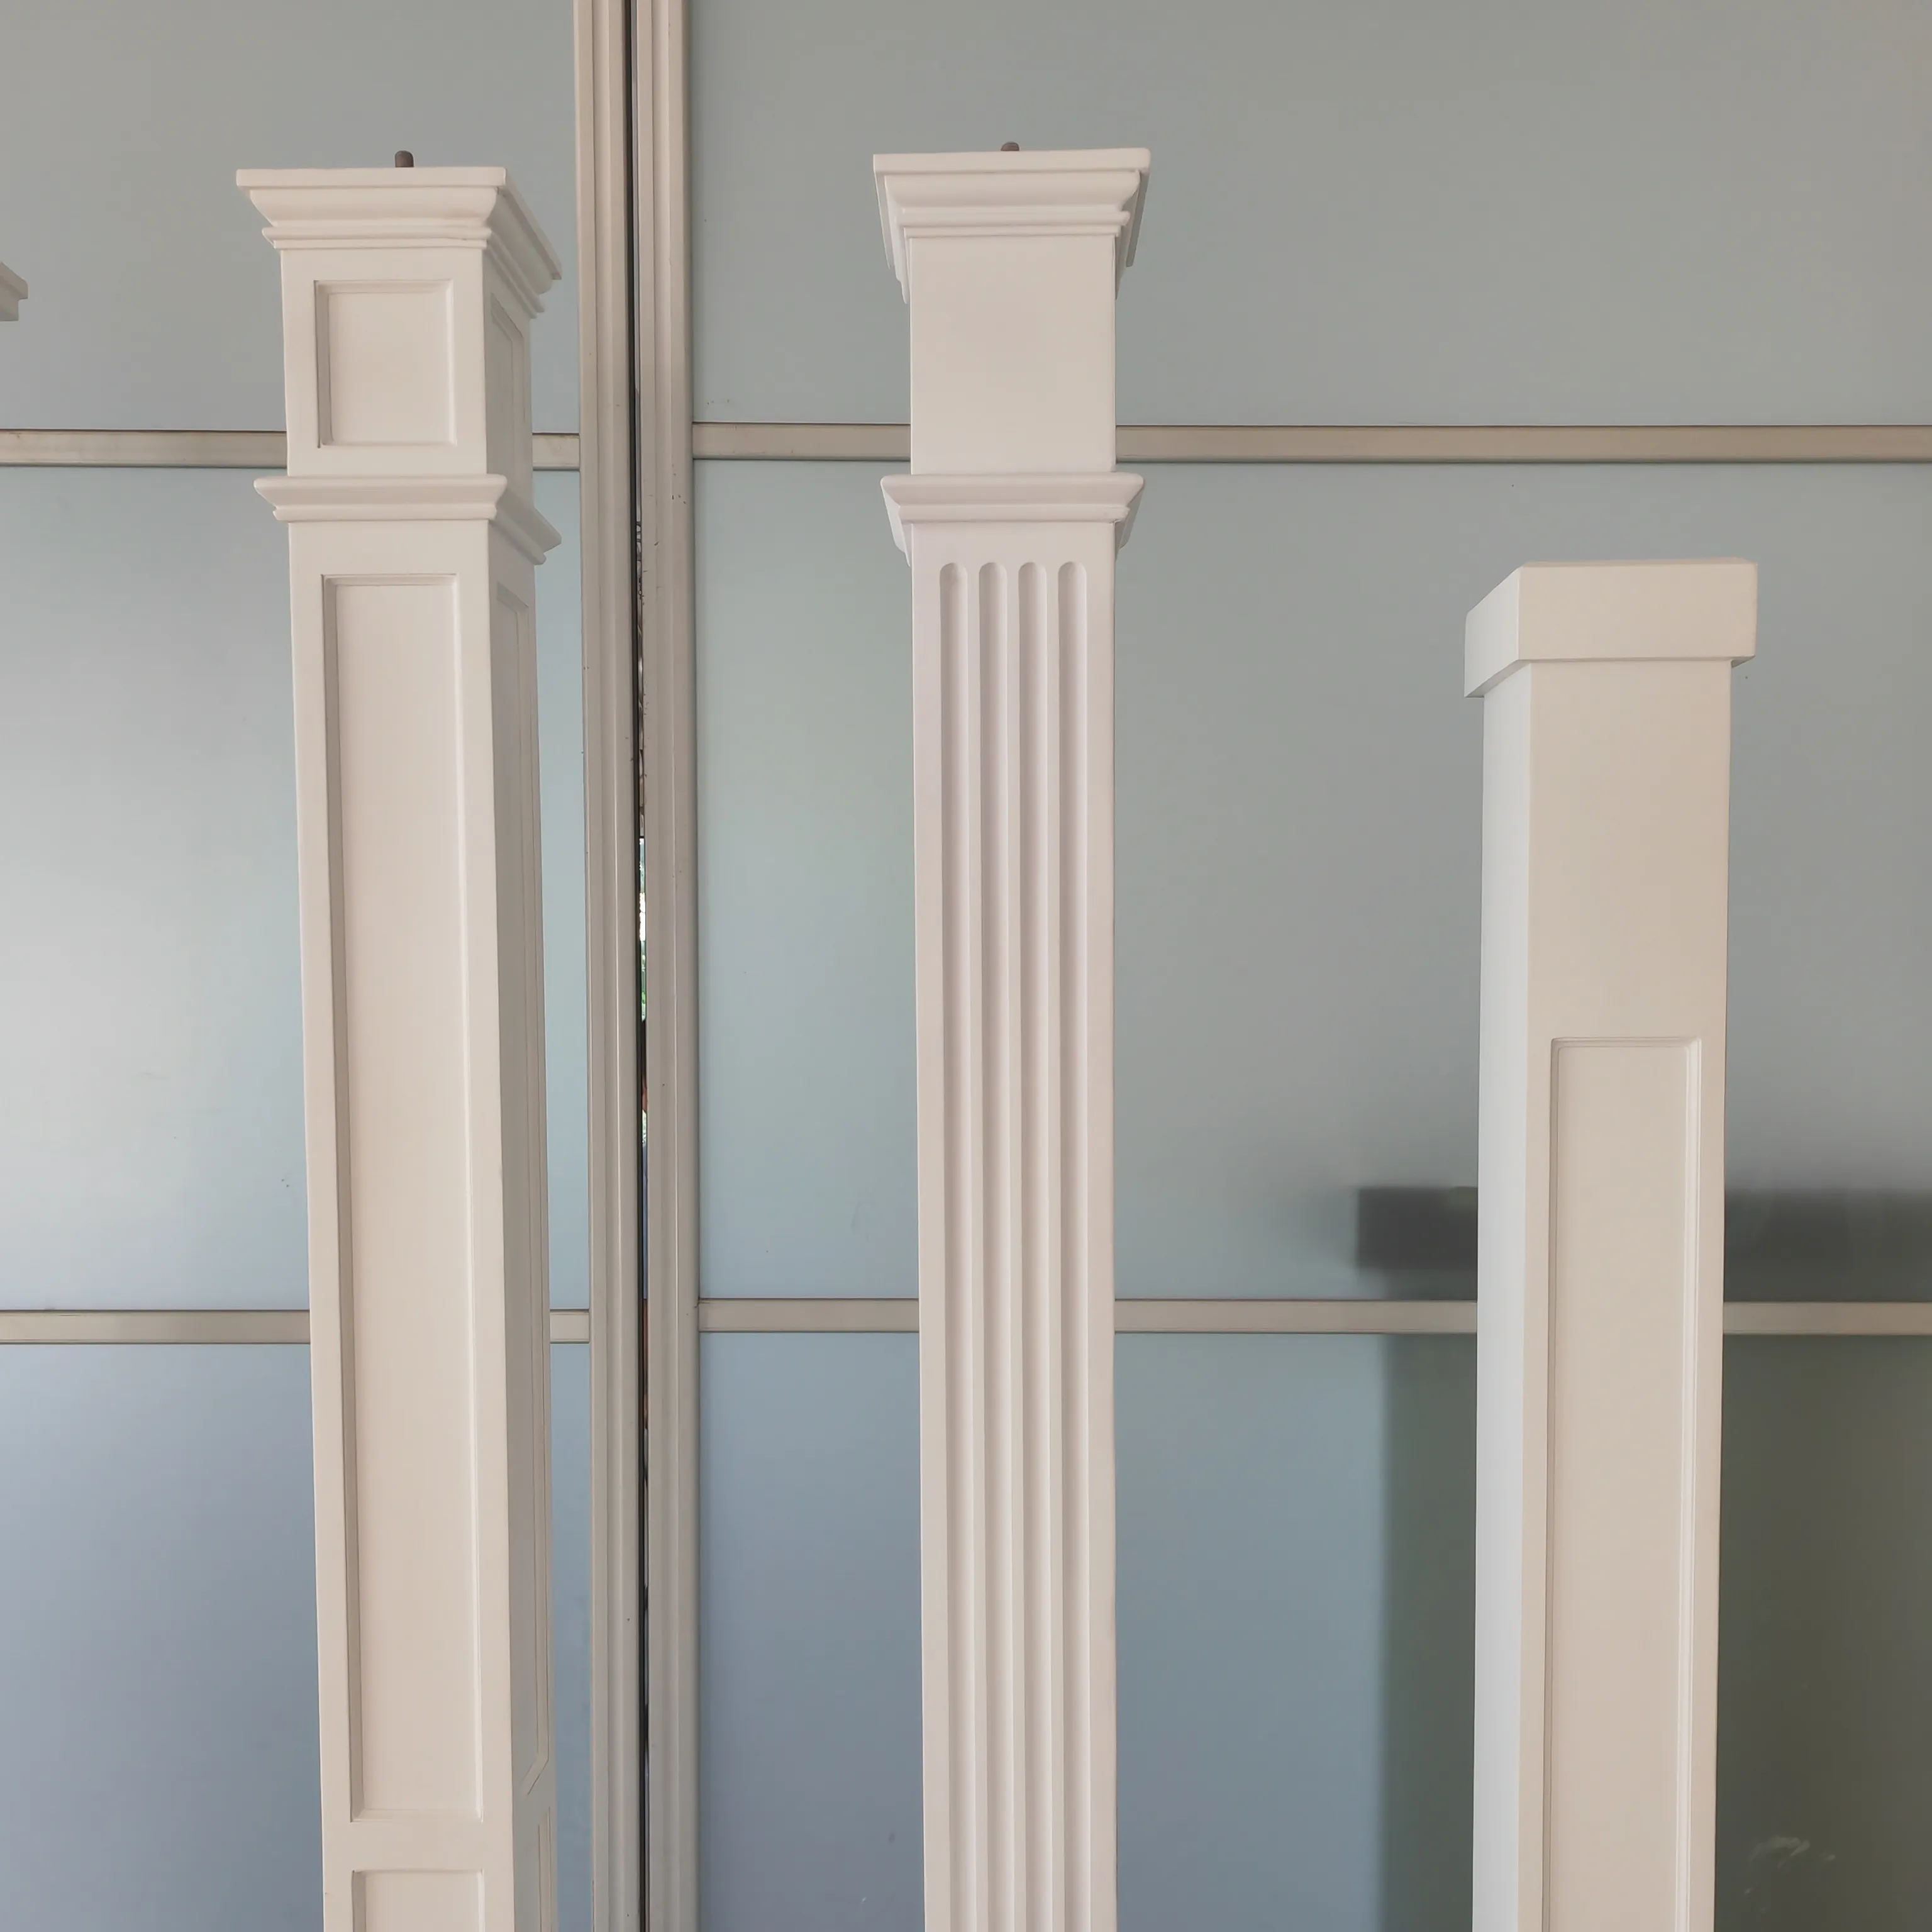 China made PU Column wraps Interior and exterior -- Service excellence and make your home unforgettable